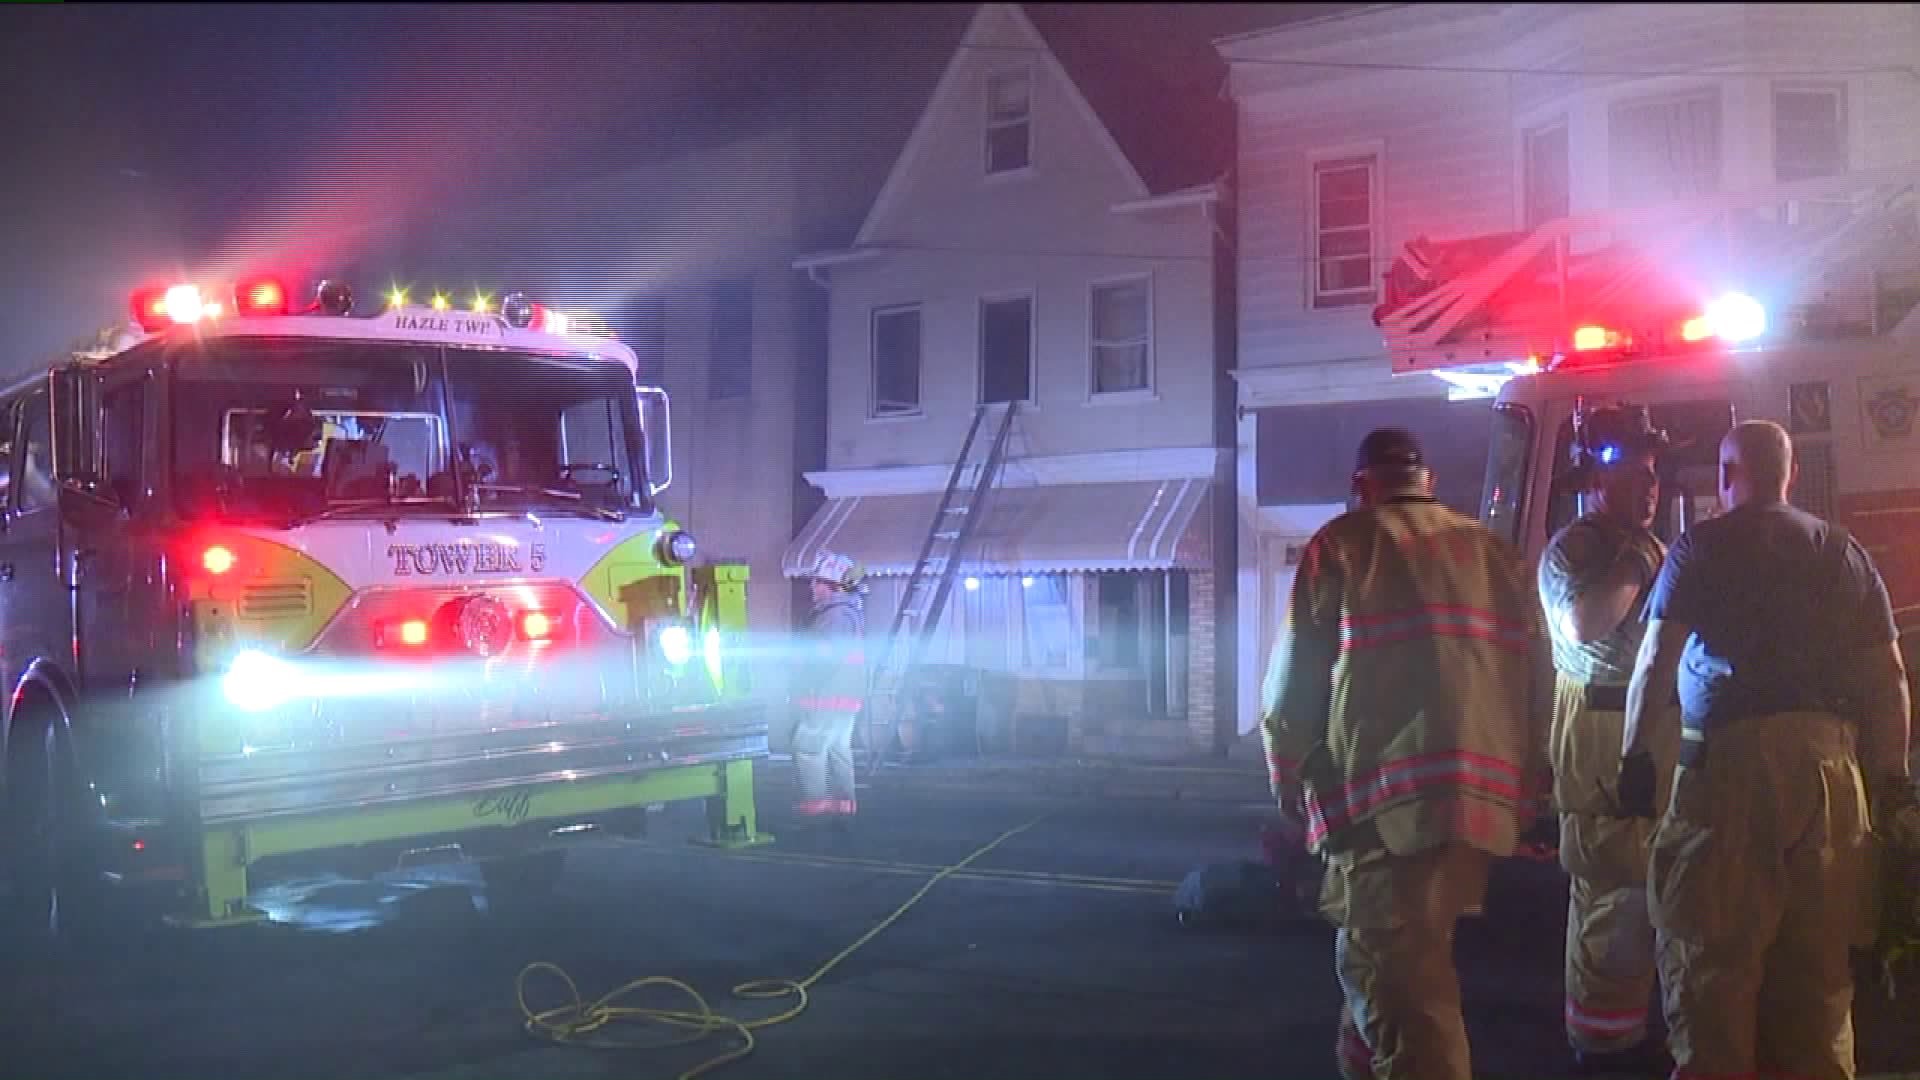 Fire Damages Home in Freeland